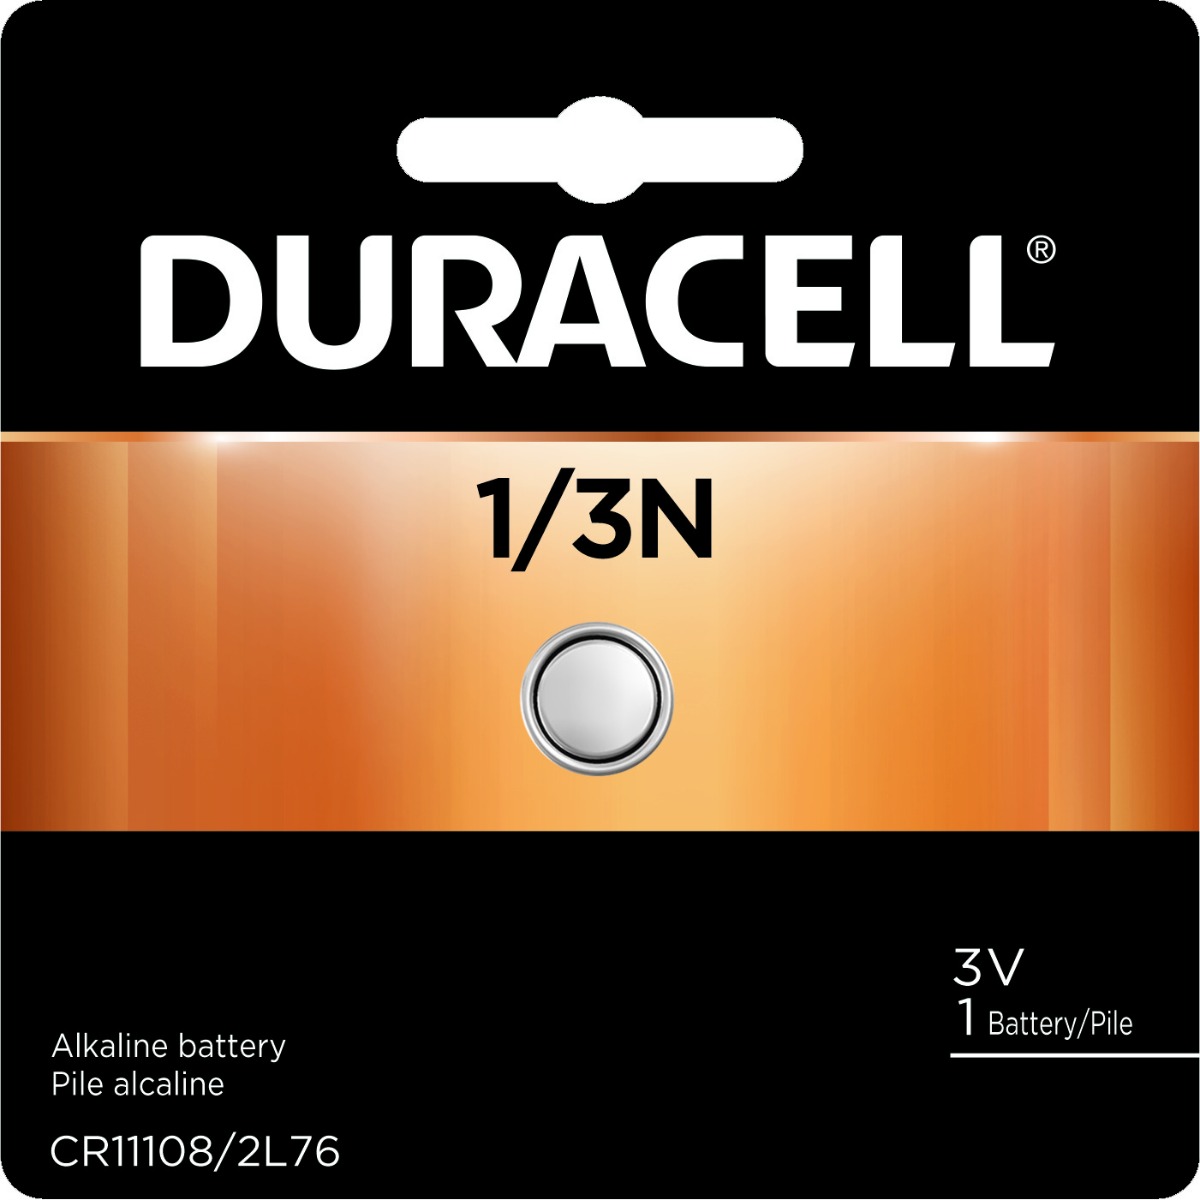 Duracell 1/3N Button Cell, 3V, DL1/3NBPK, Lithium Battery (1 Battery)